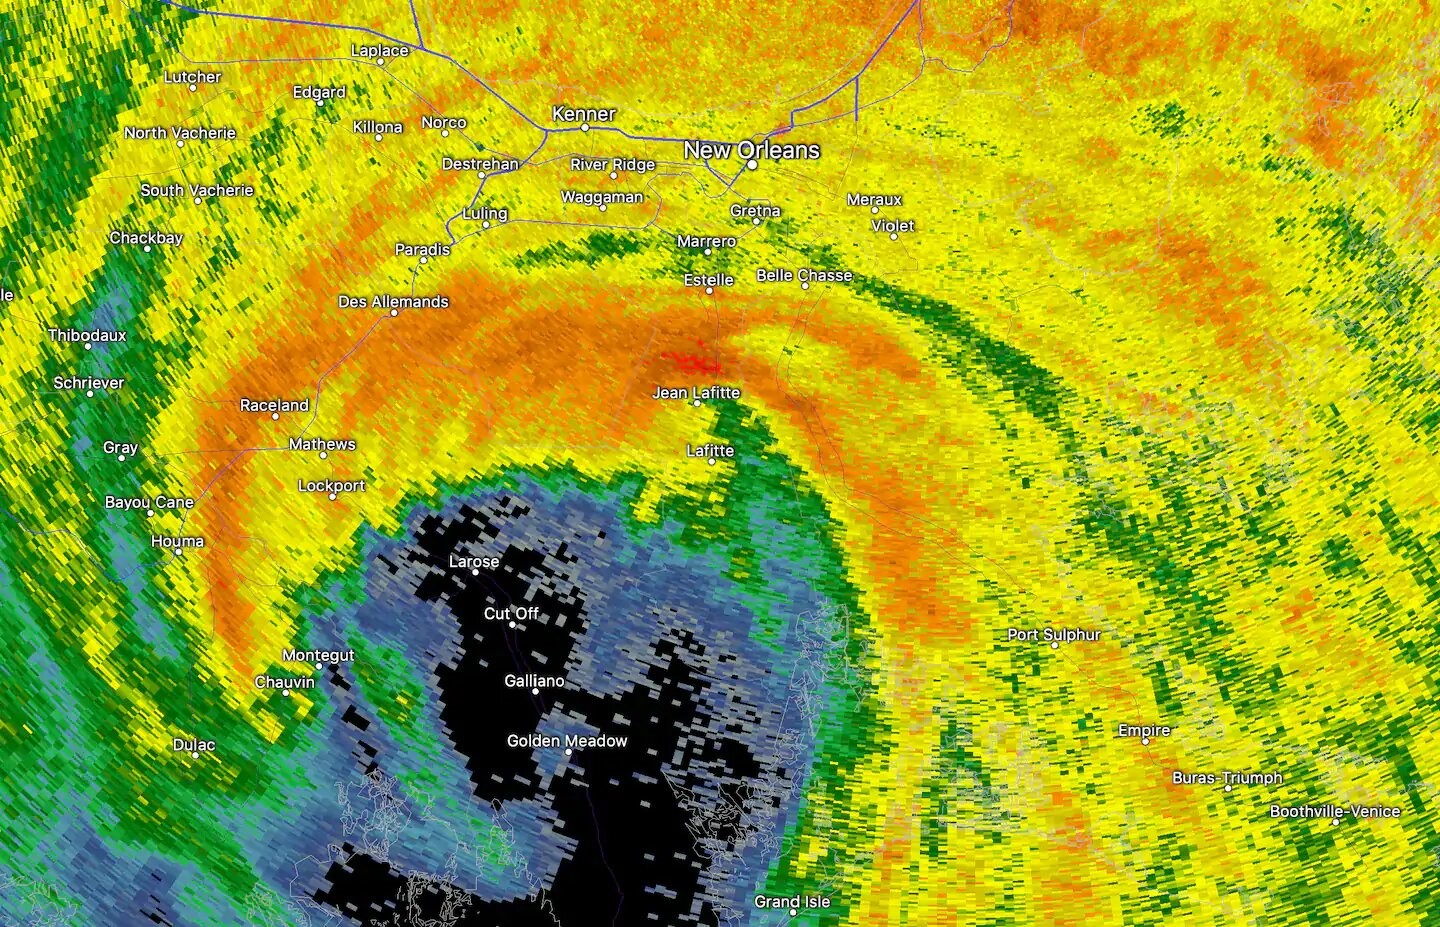 Tropical Storm Zeta Turns Out The Lights In New Orleans With Max 60 MPH Winds